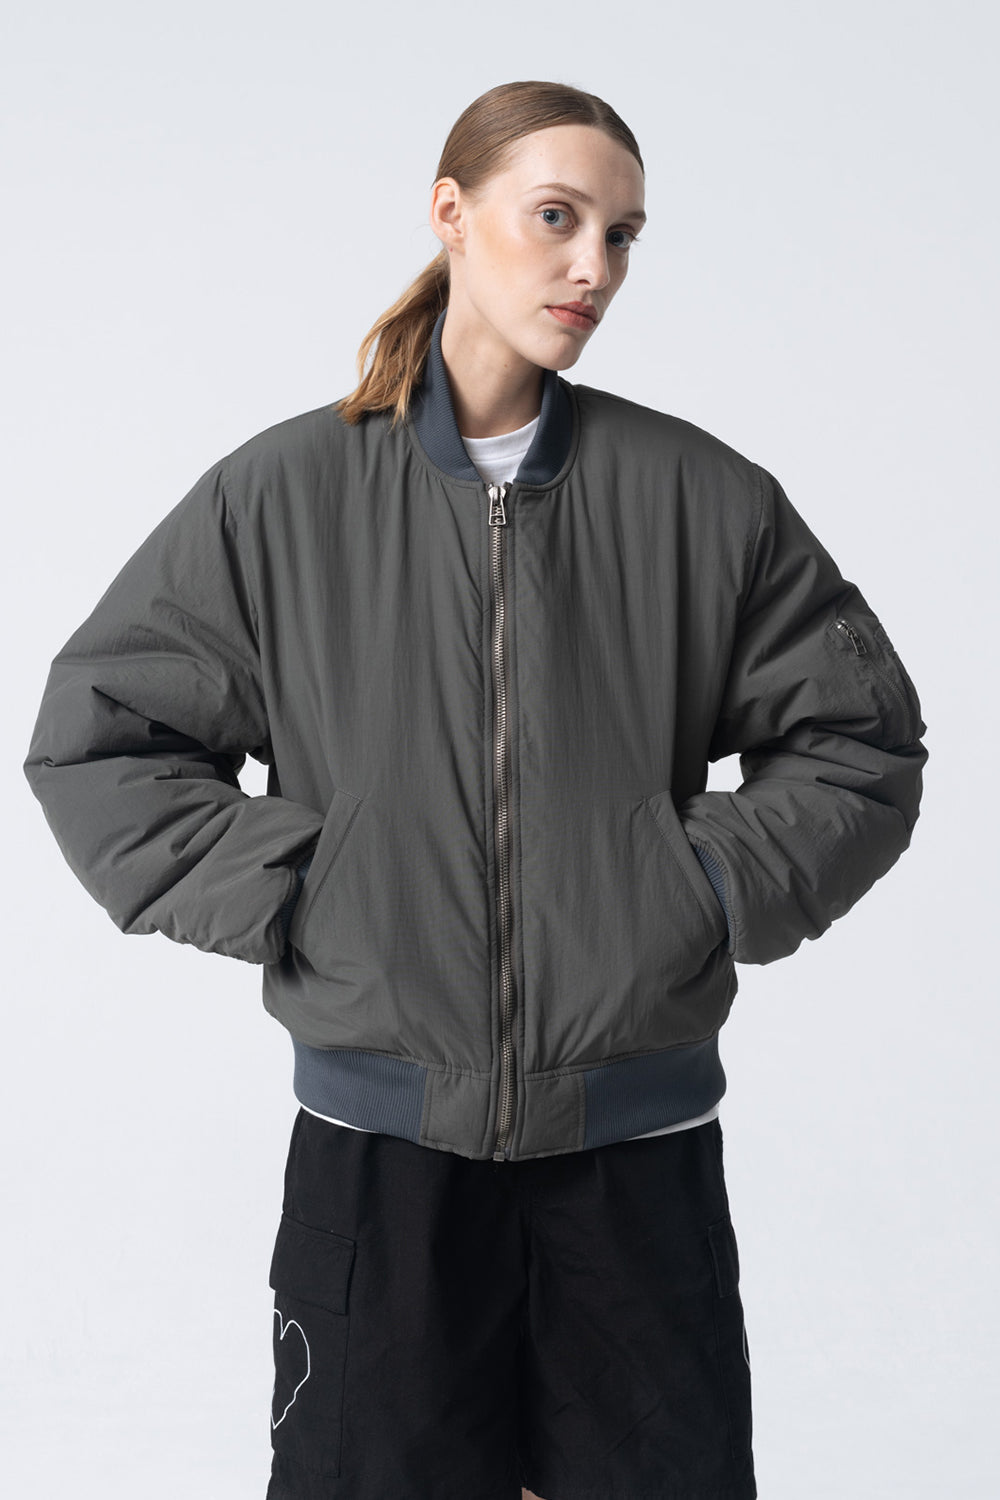 Coats + Jackets | Buy Womens Clothing Online | The Standard Store Australia